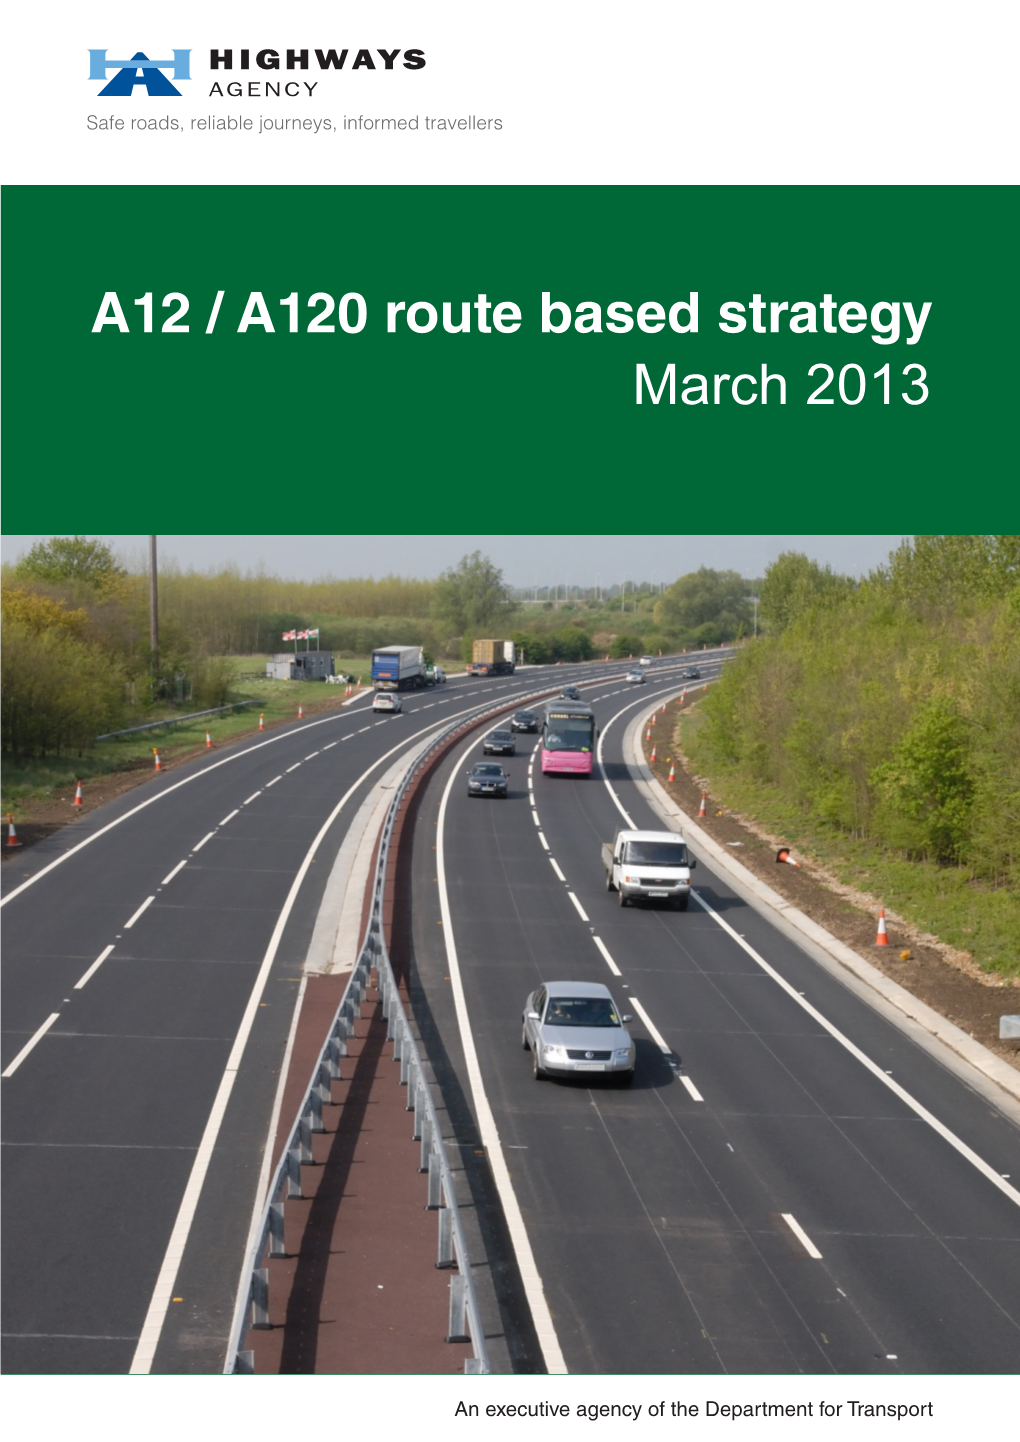 A12 / A120 Route Based Strategy January 2013 March 2013